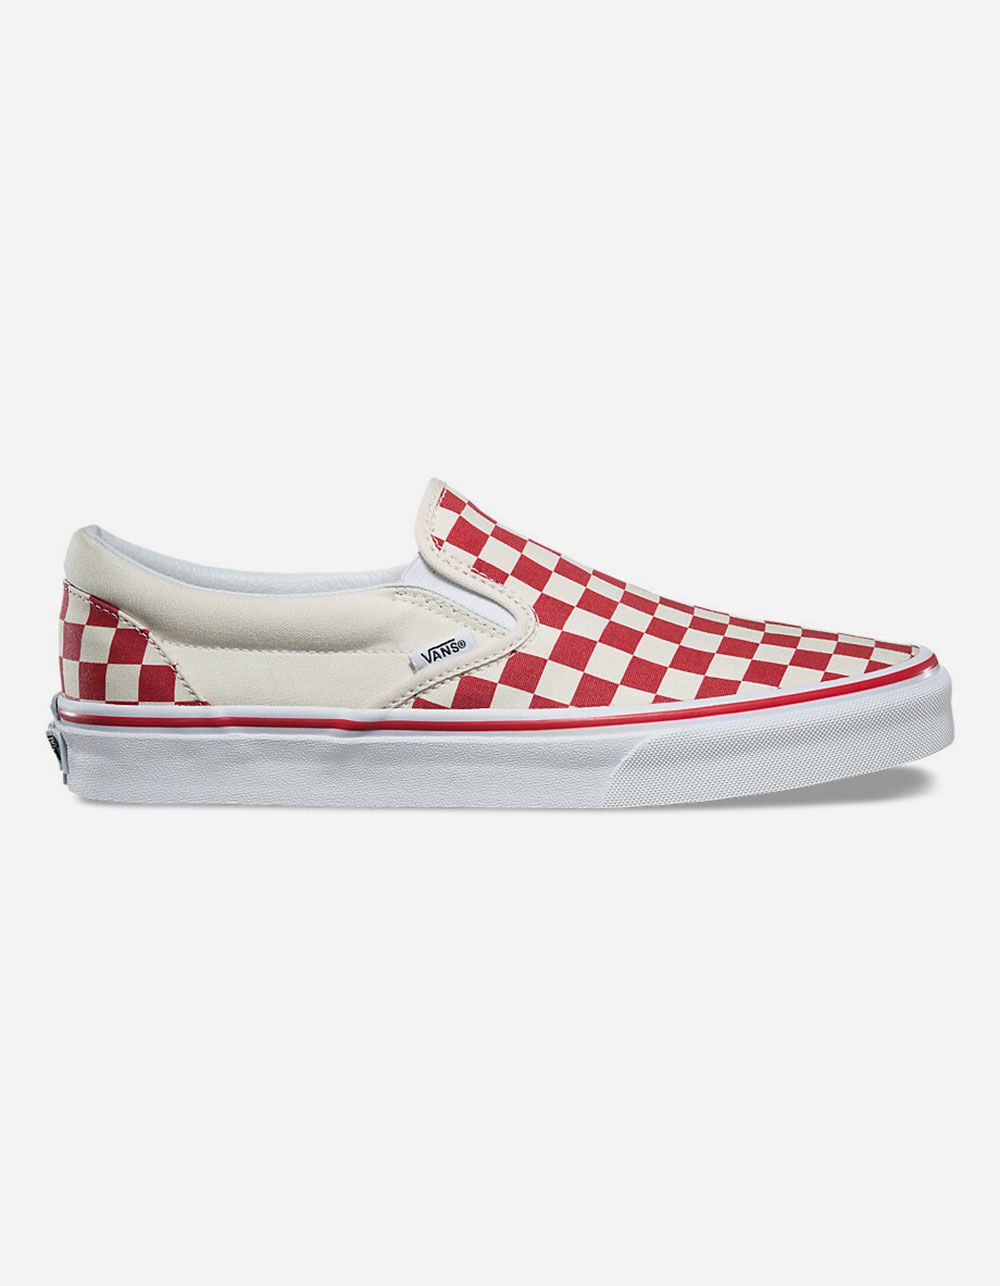 VANS PRIMARY CHECK SLIP-ON RED & WHITE SHOES | Tillys